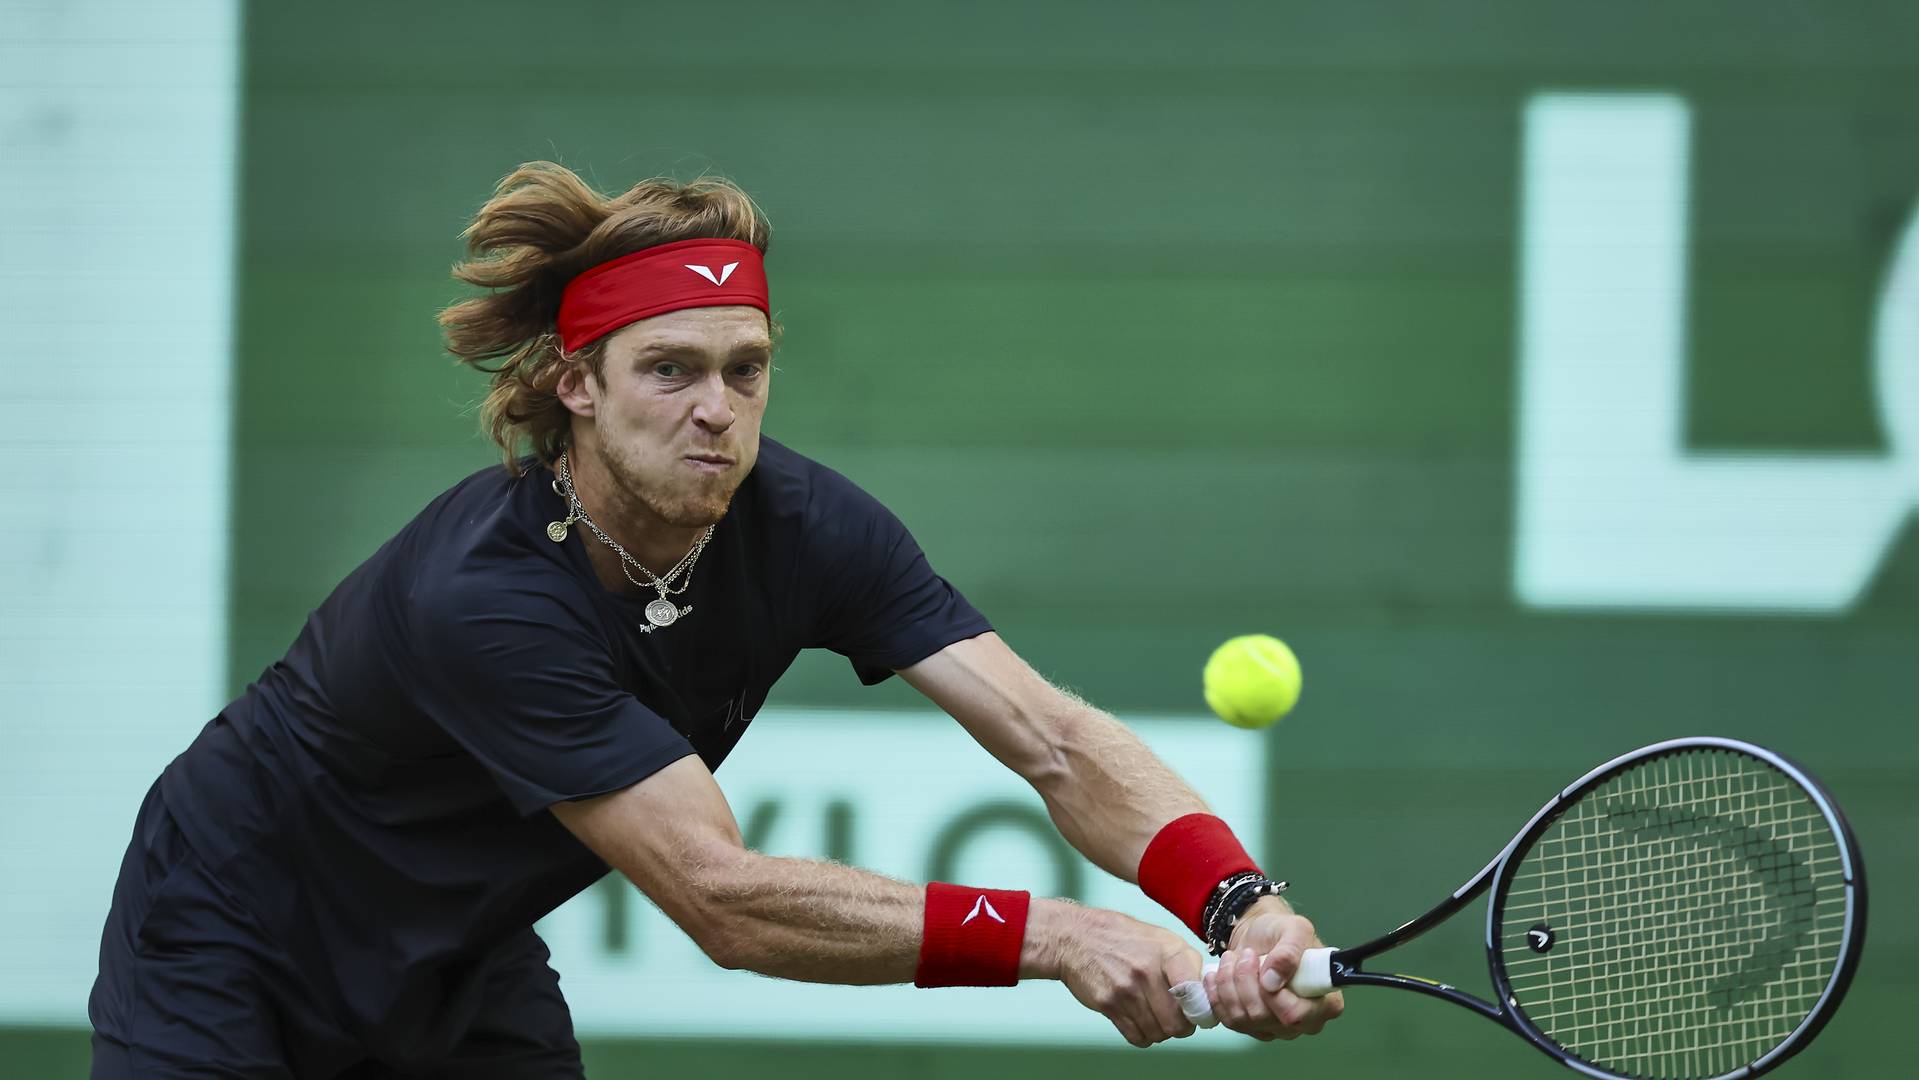 Andrey Rublev in Halle final again after 2021